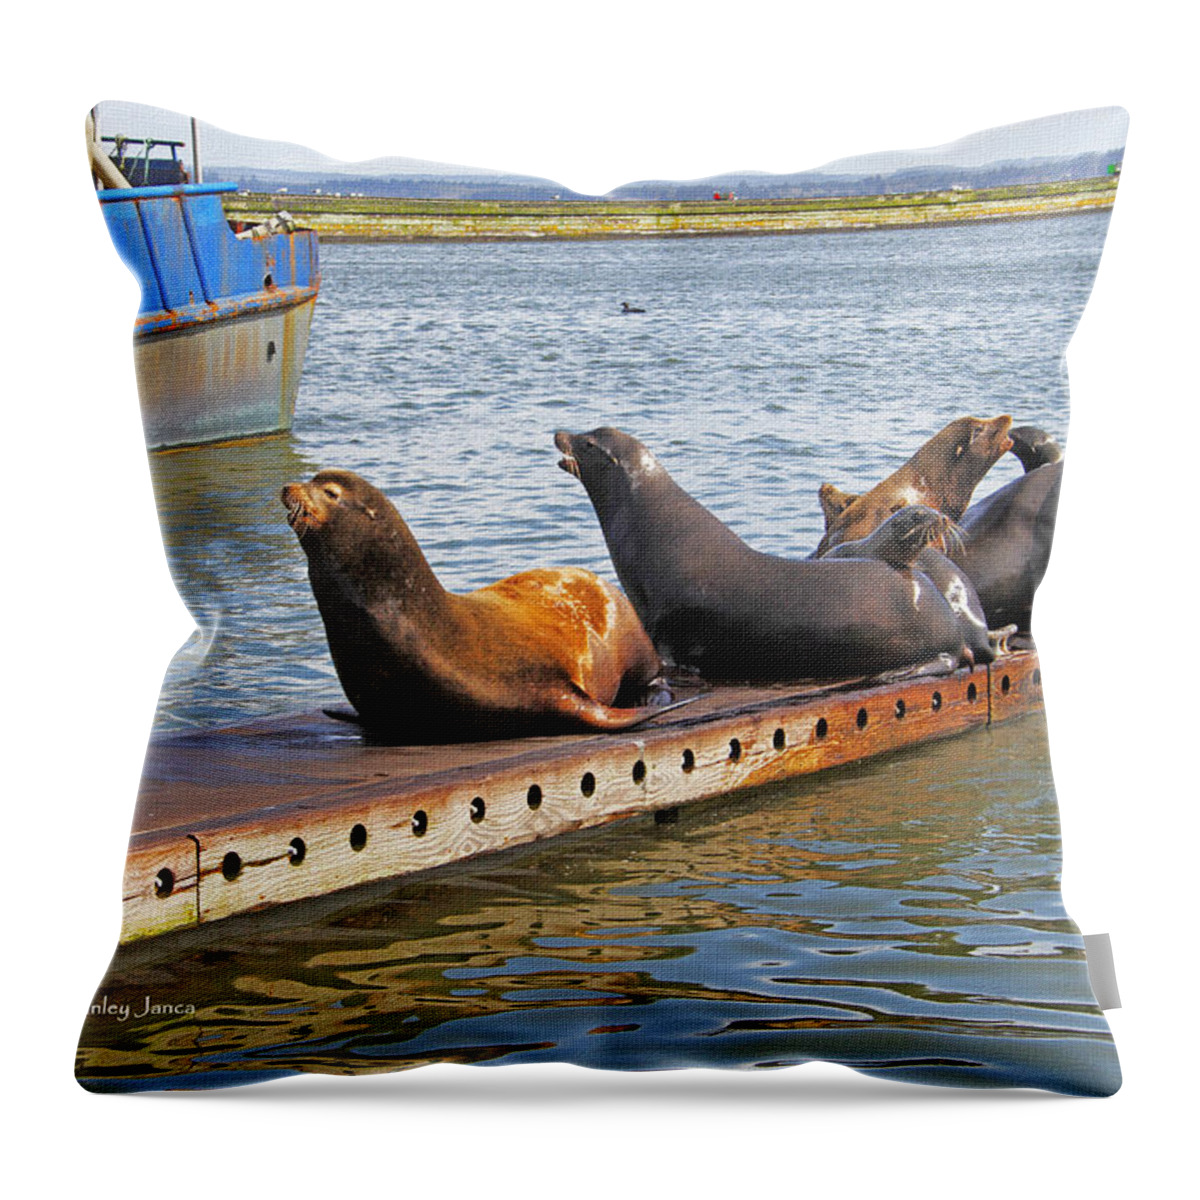 Sea Lions At West Port Washington Throw Pillow featuring the photograph Sea Lions At West Port Washington by Tom Janca